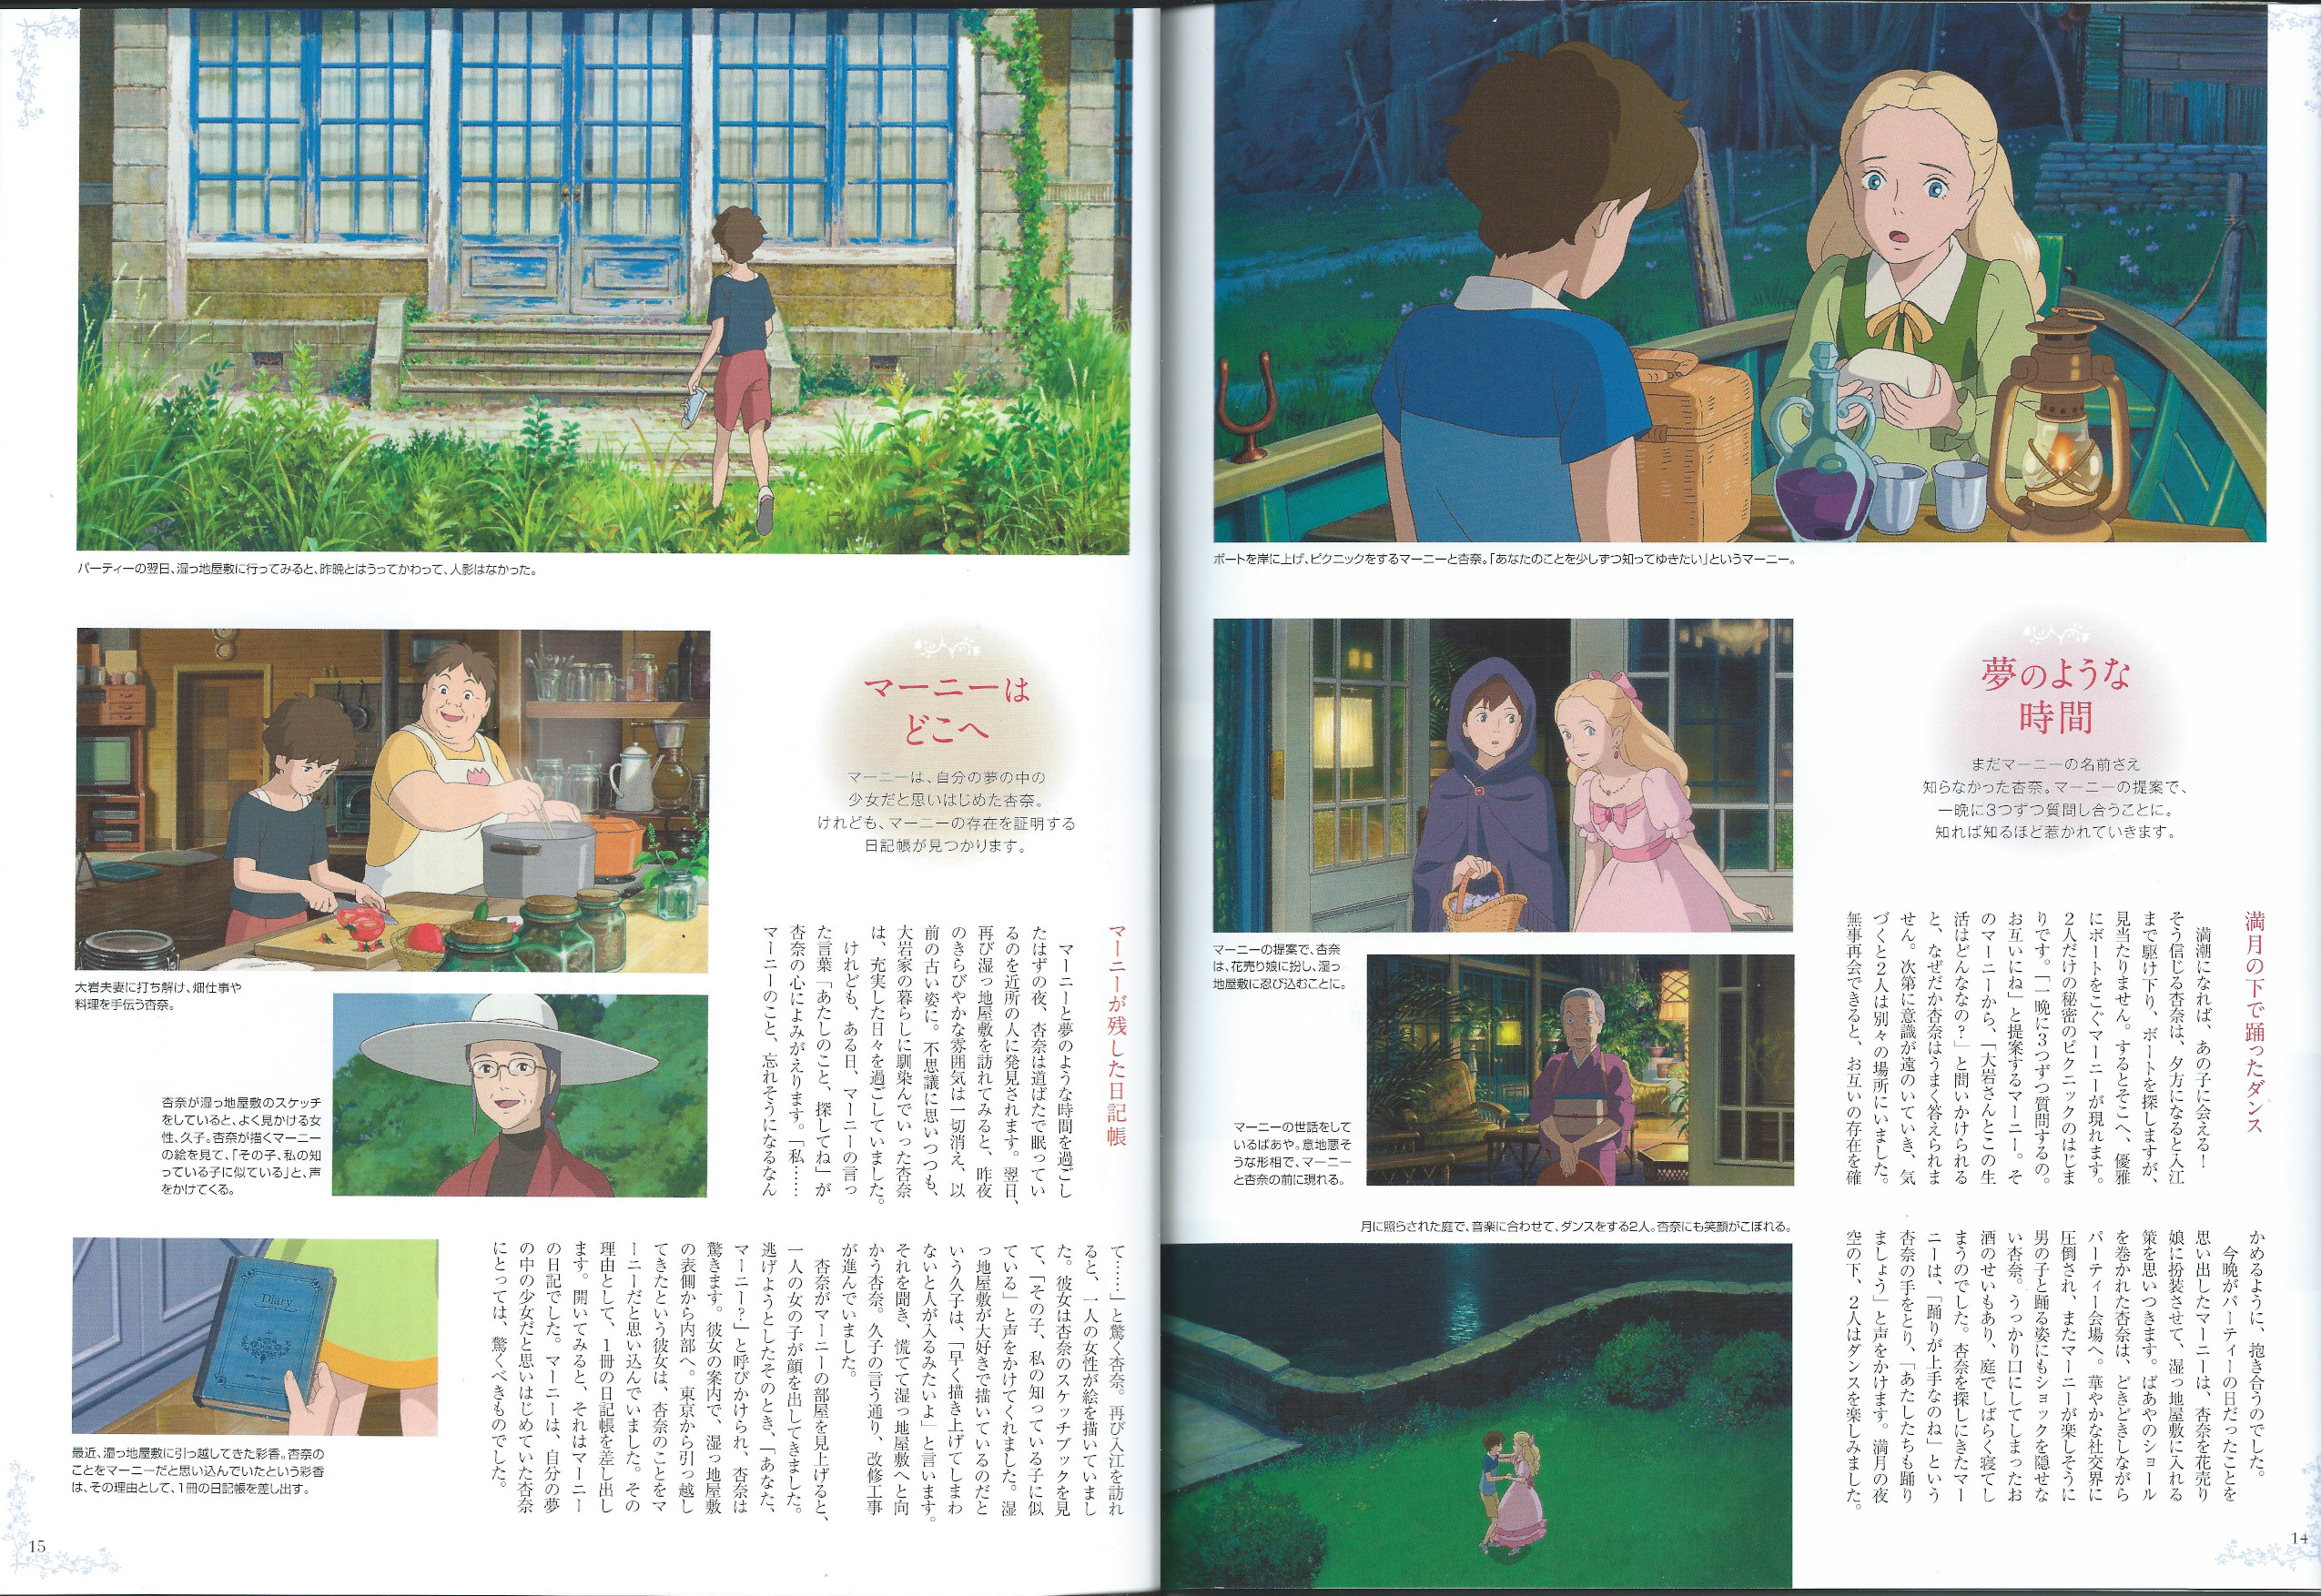 Pages 14 and 15 of the magazine